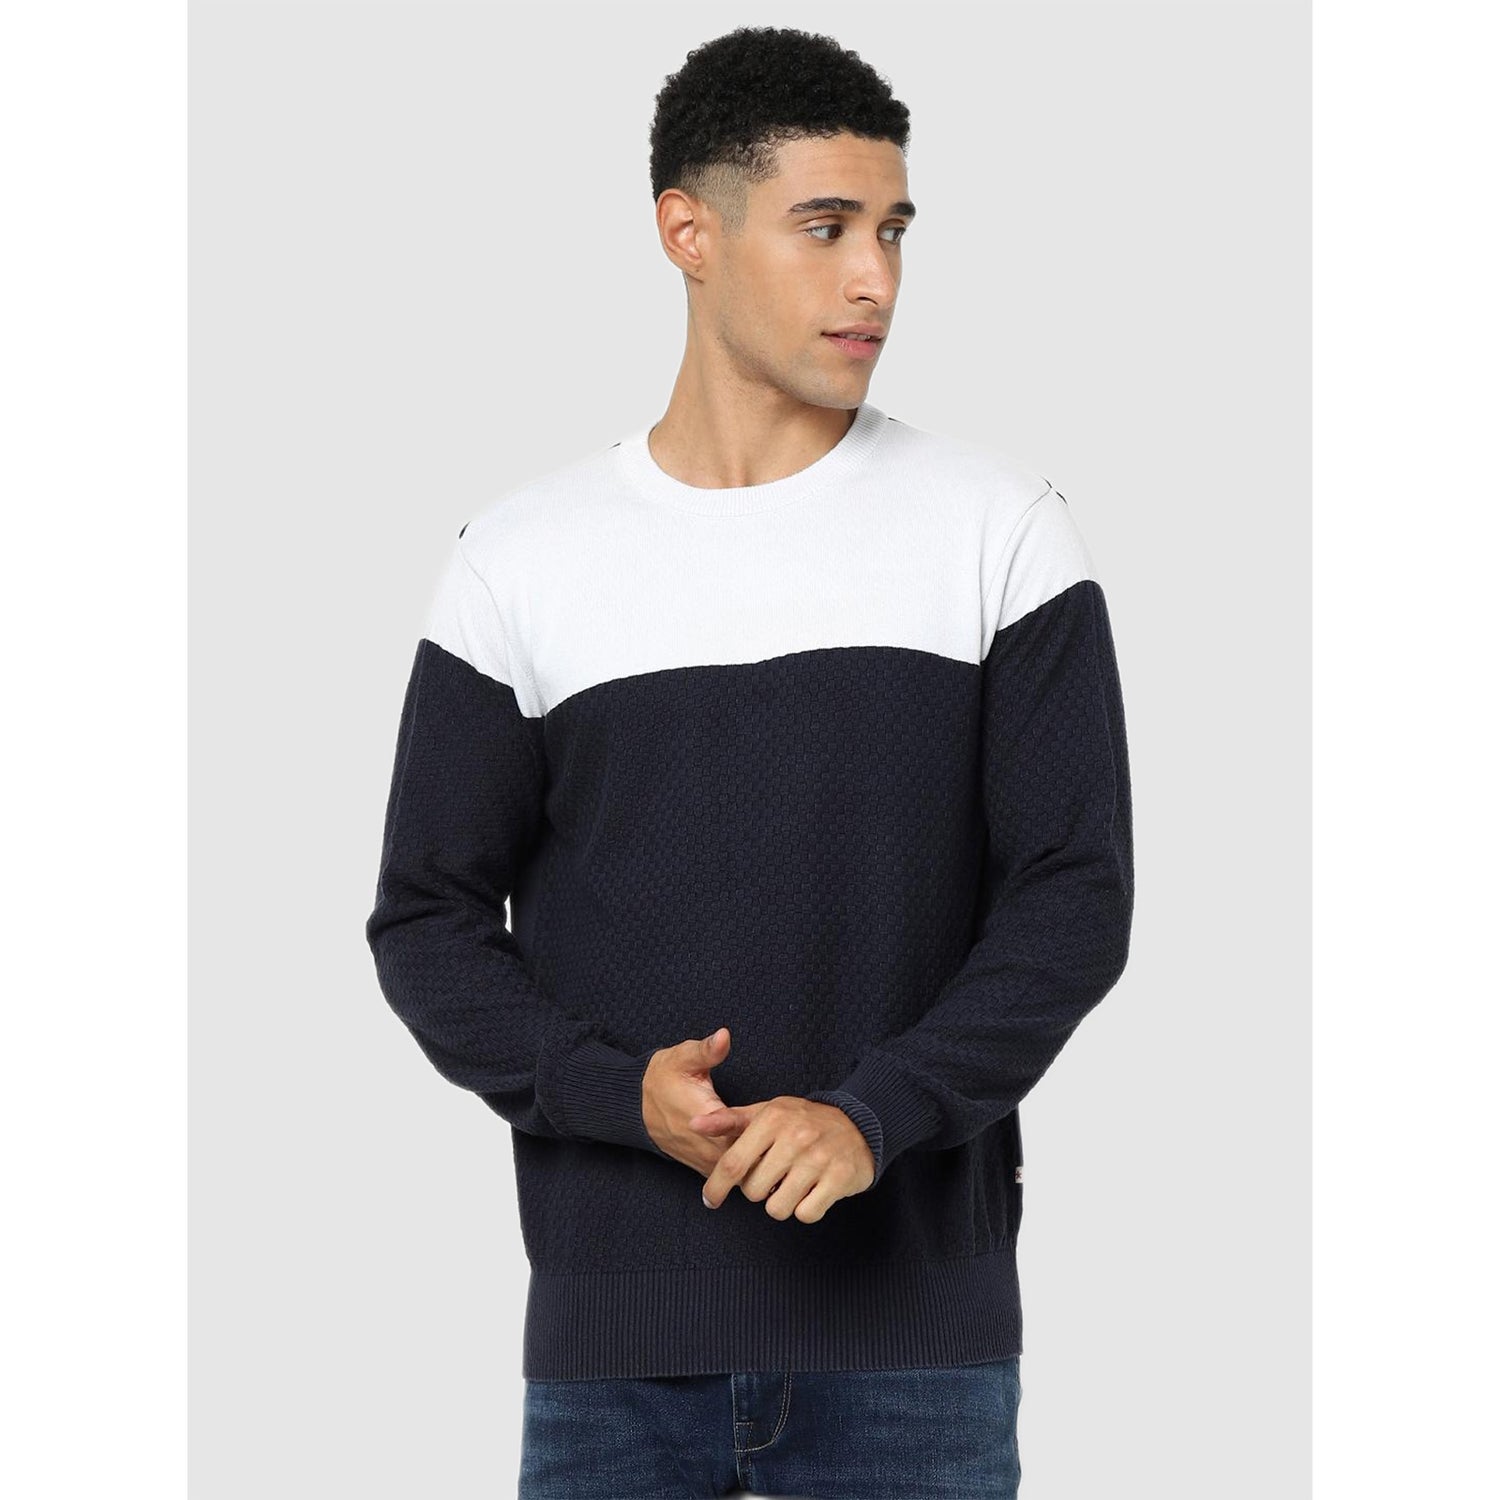 Navy Blue and White Colourblocked Cotton Pullover Sweater (CESQUARE)